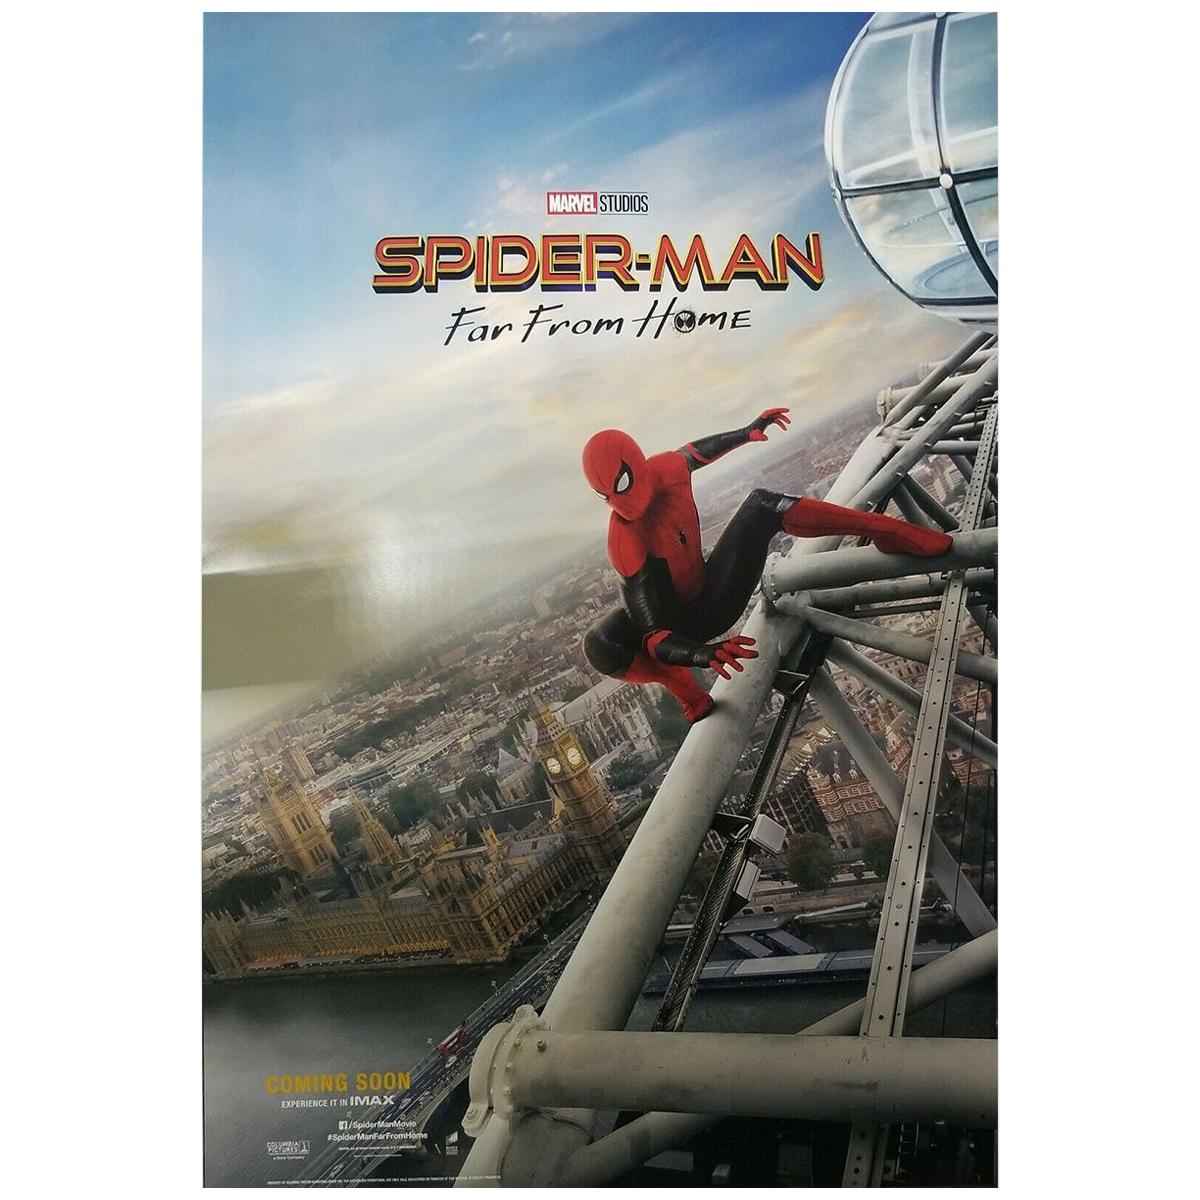 Spider-Man Far From Home '2019' Poster For Sale